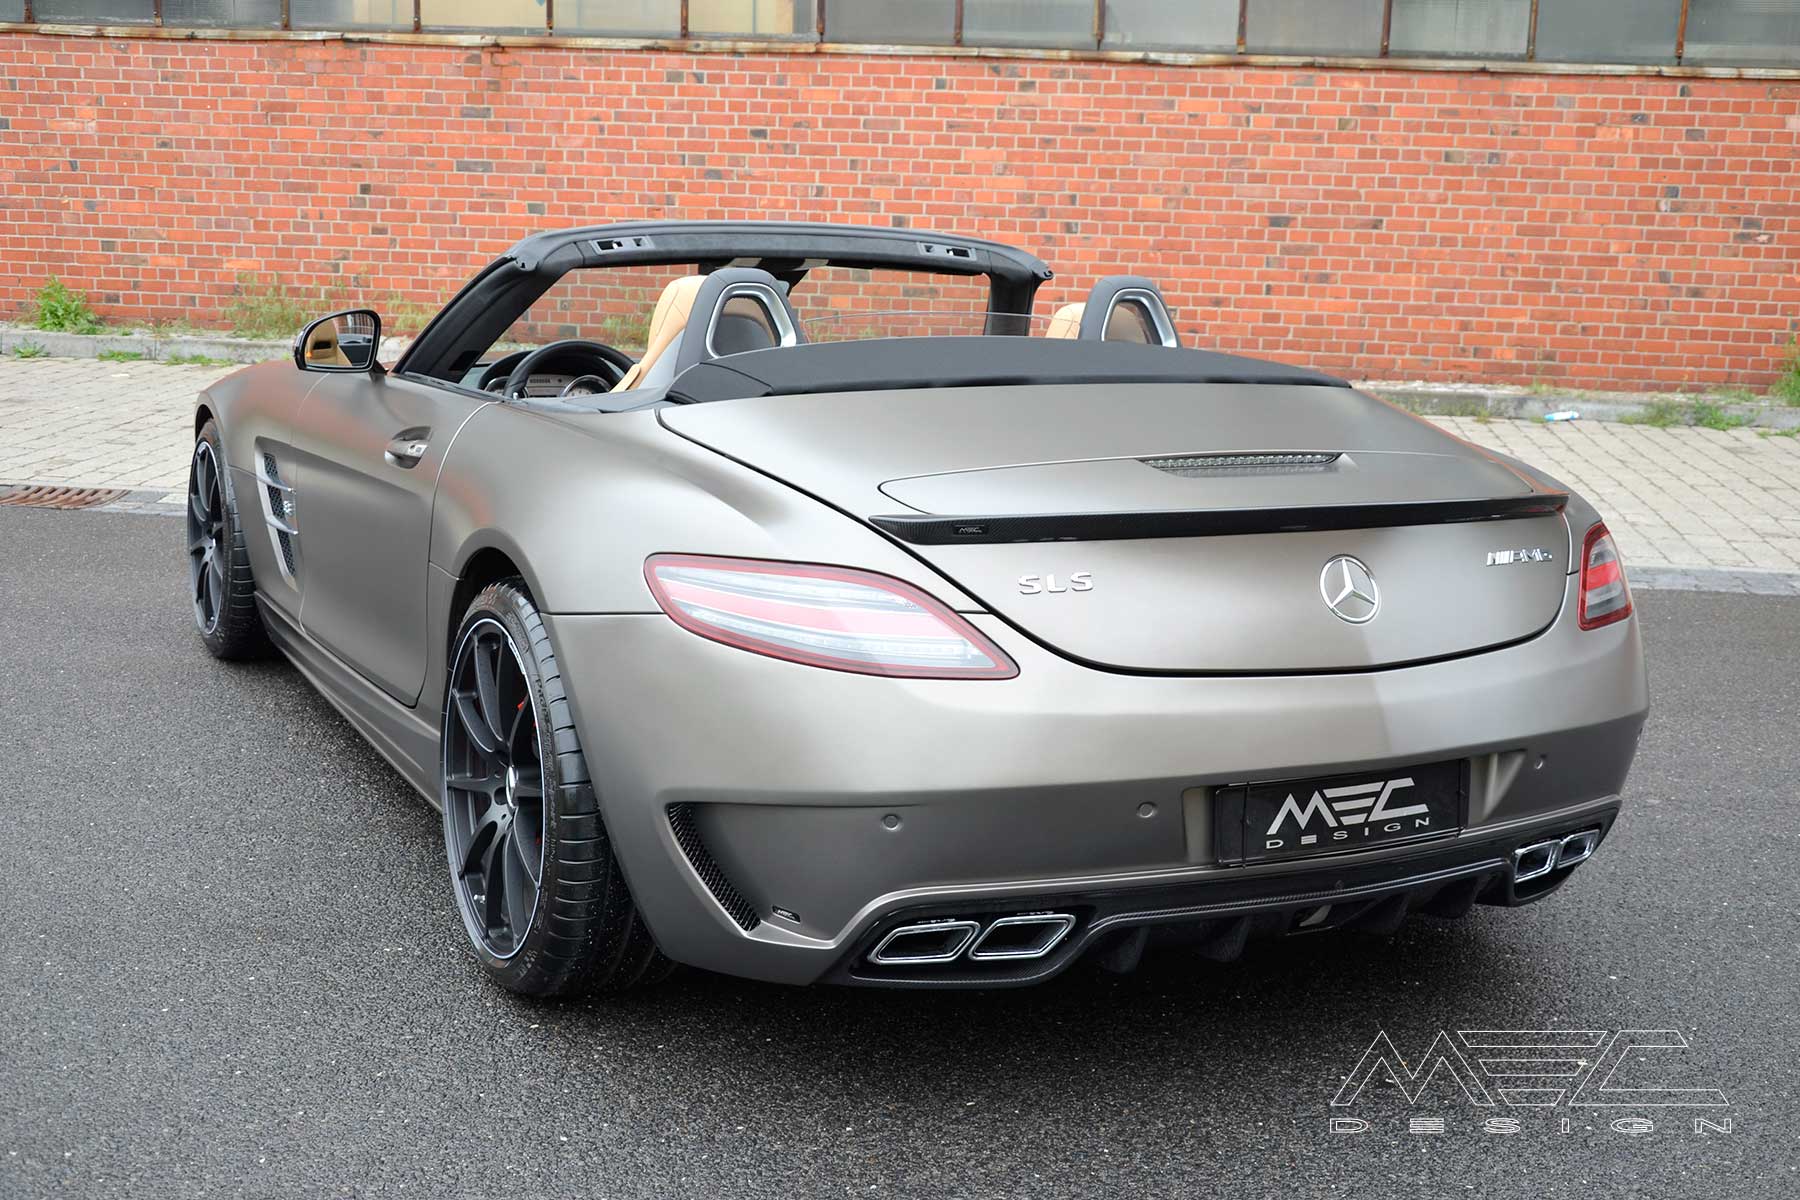 Sls Class With Roadster Matt Grey And Black Series Style